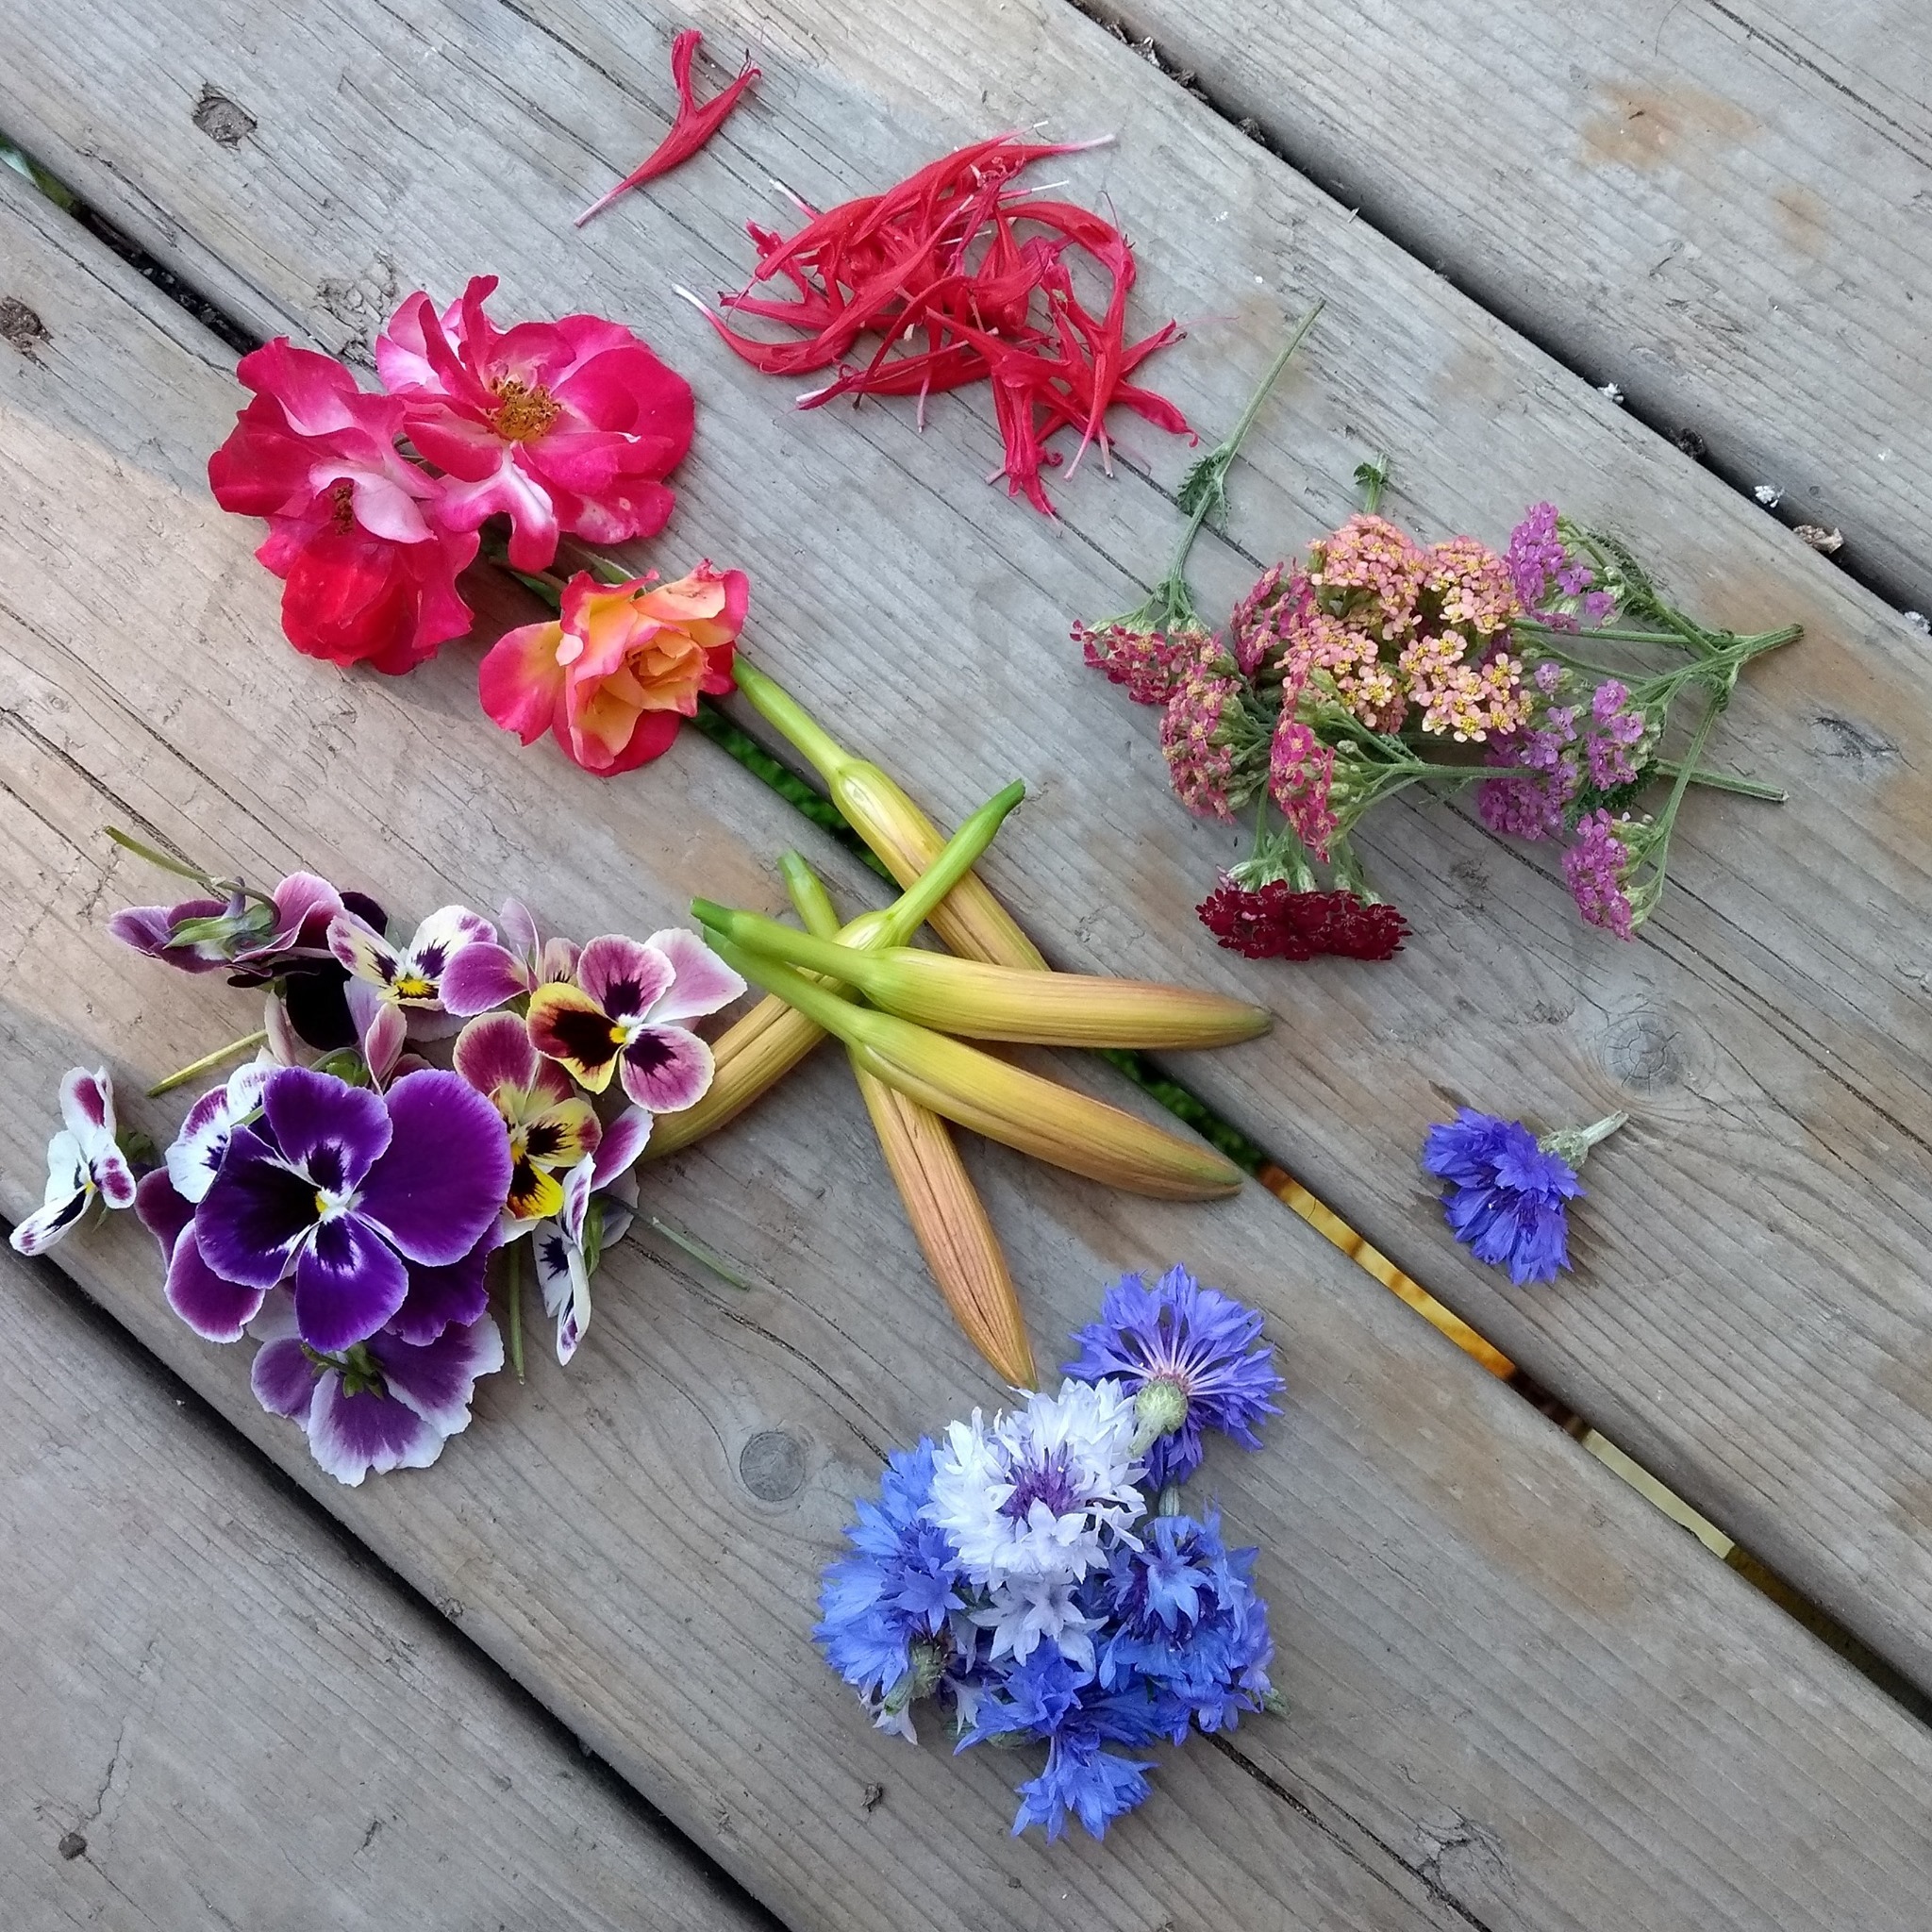 A selection of edible flowers that can be eaten as is or for cooking and teas. From the top clockwise, Monarda didyma, Achillea millefolium, Centaurea, Viola and Rose with Hemerocallis buds (daylilies) in the center.   IDEALITES/CC BY-SA 4.0